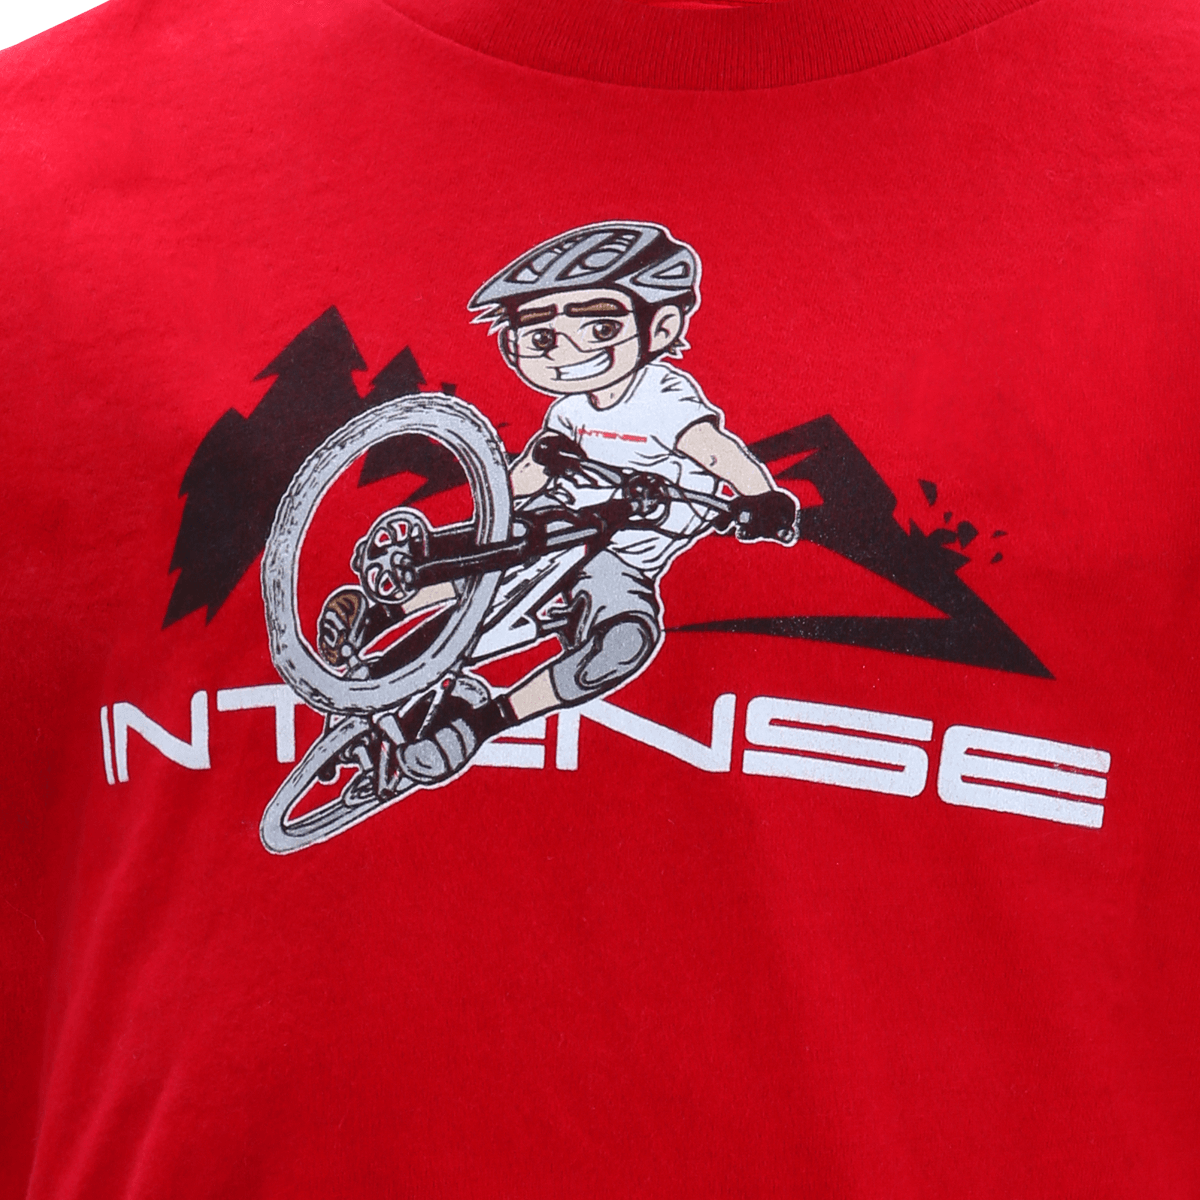 Shop INTENSE Cycles Red Tune Tee for sale online